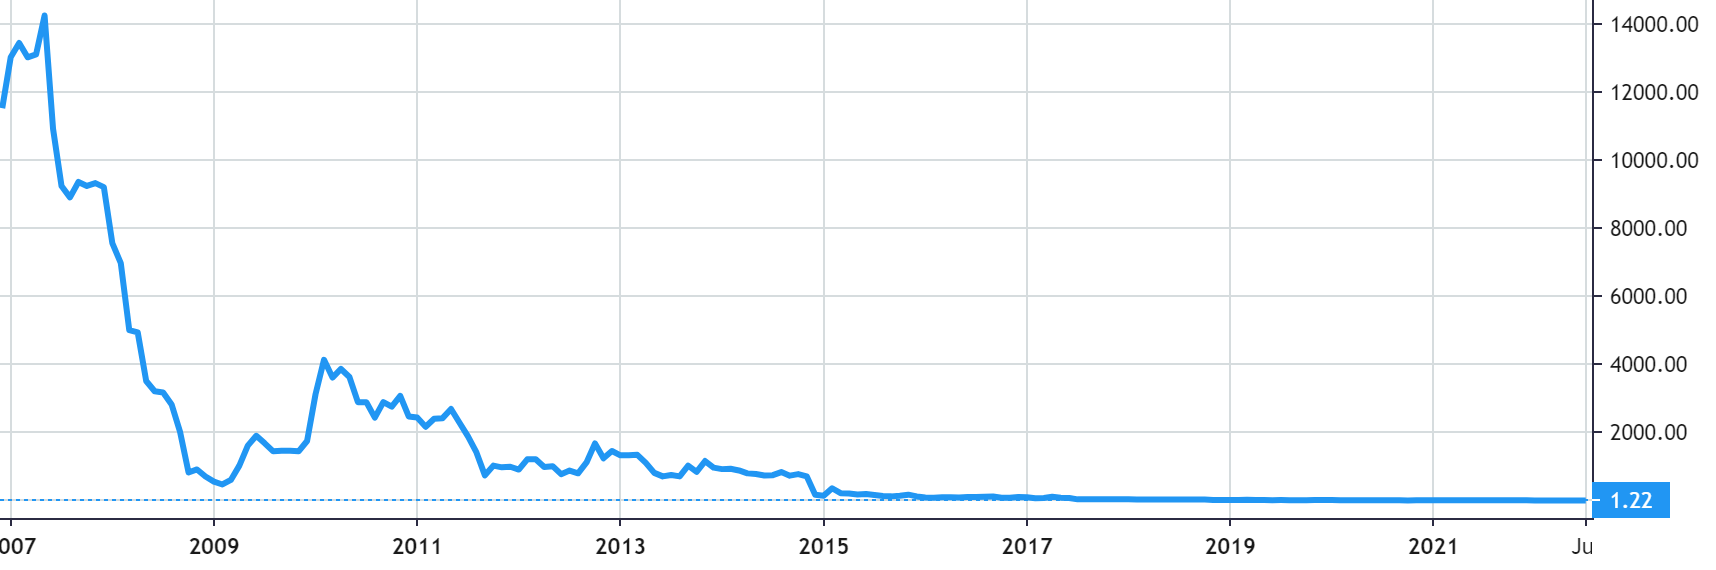 Cyclacel Pharmaceuticals share price history